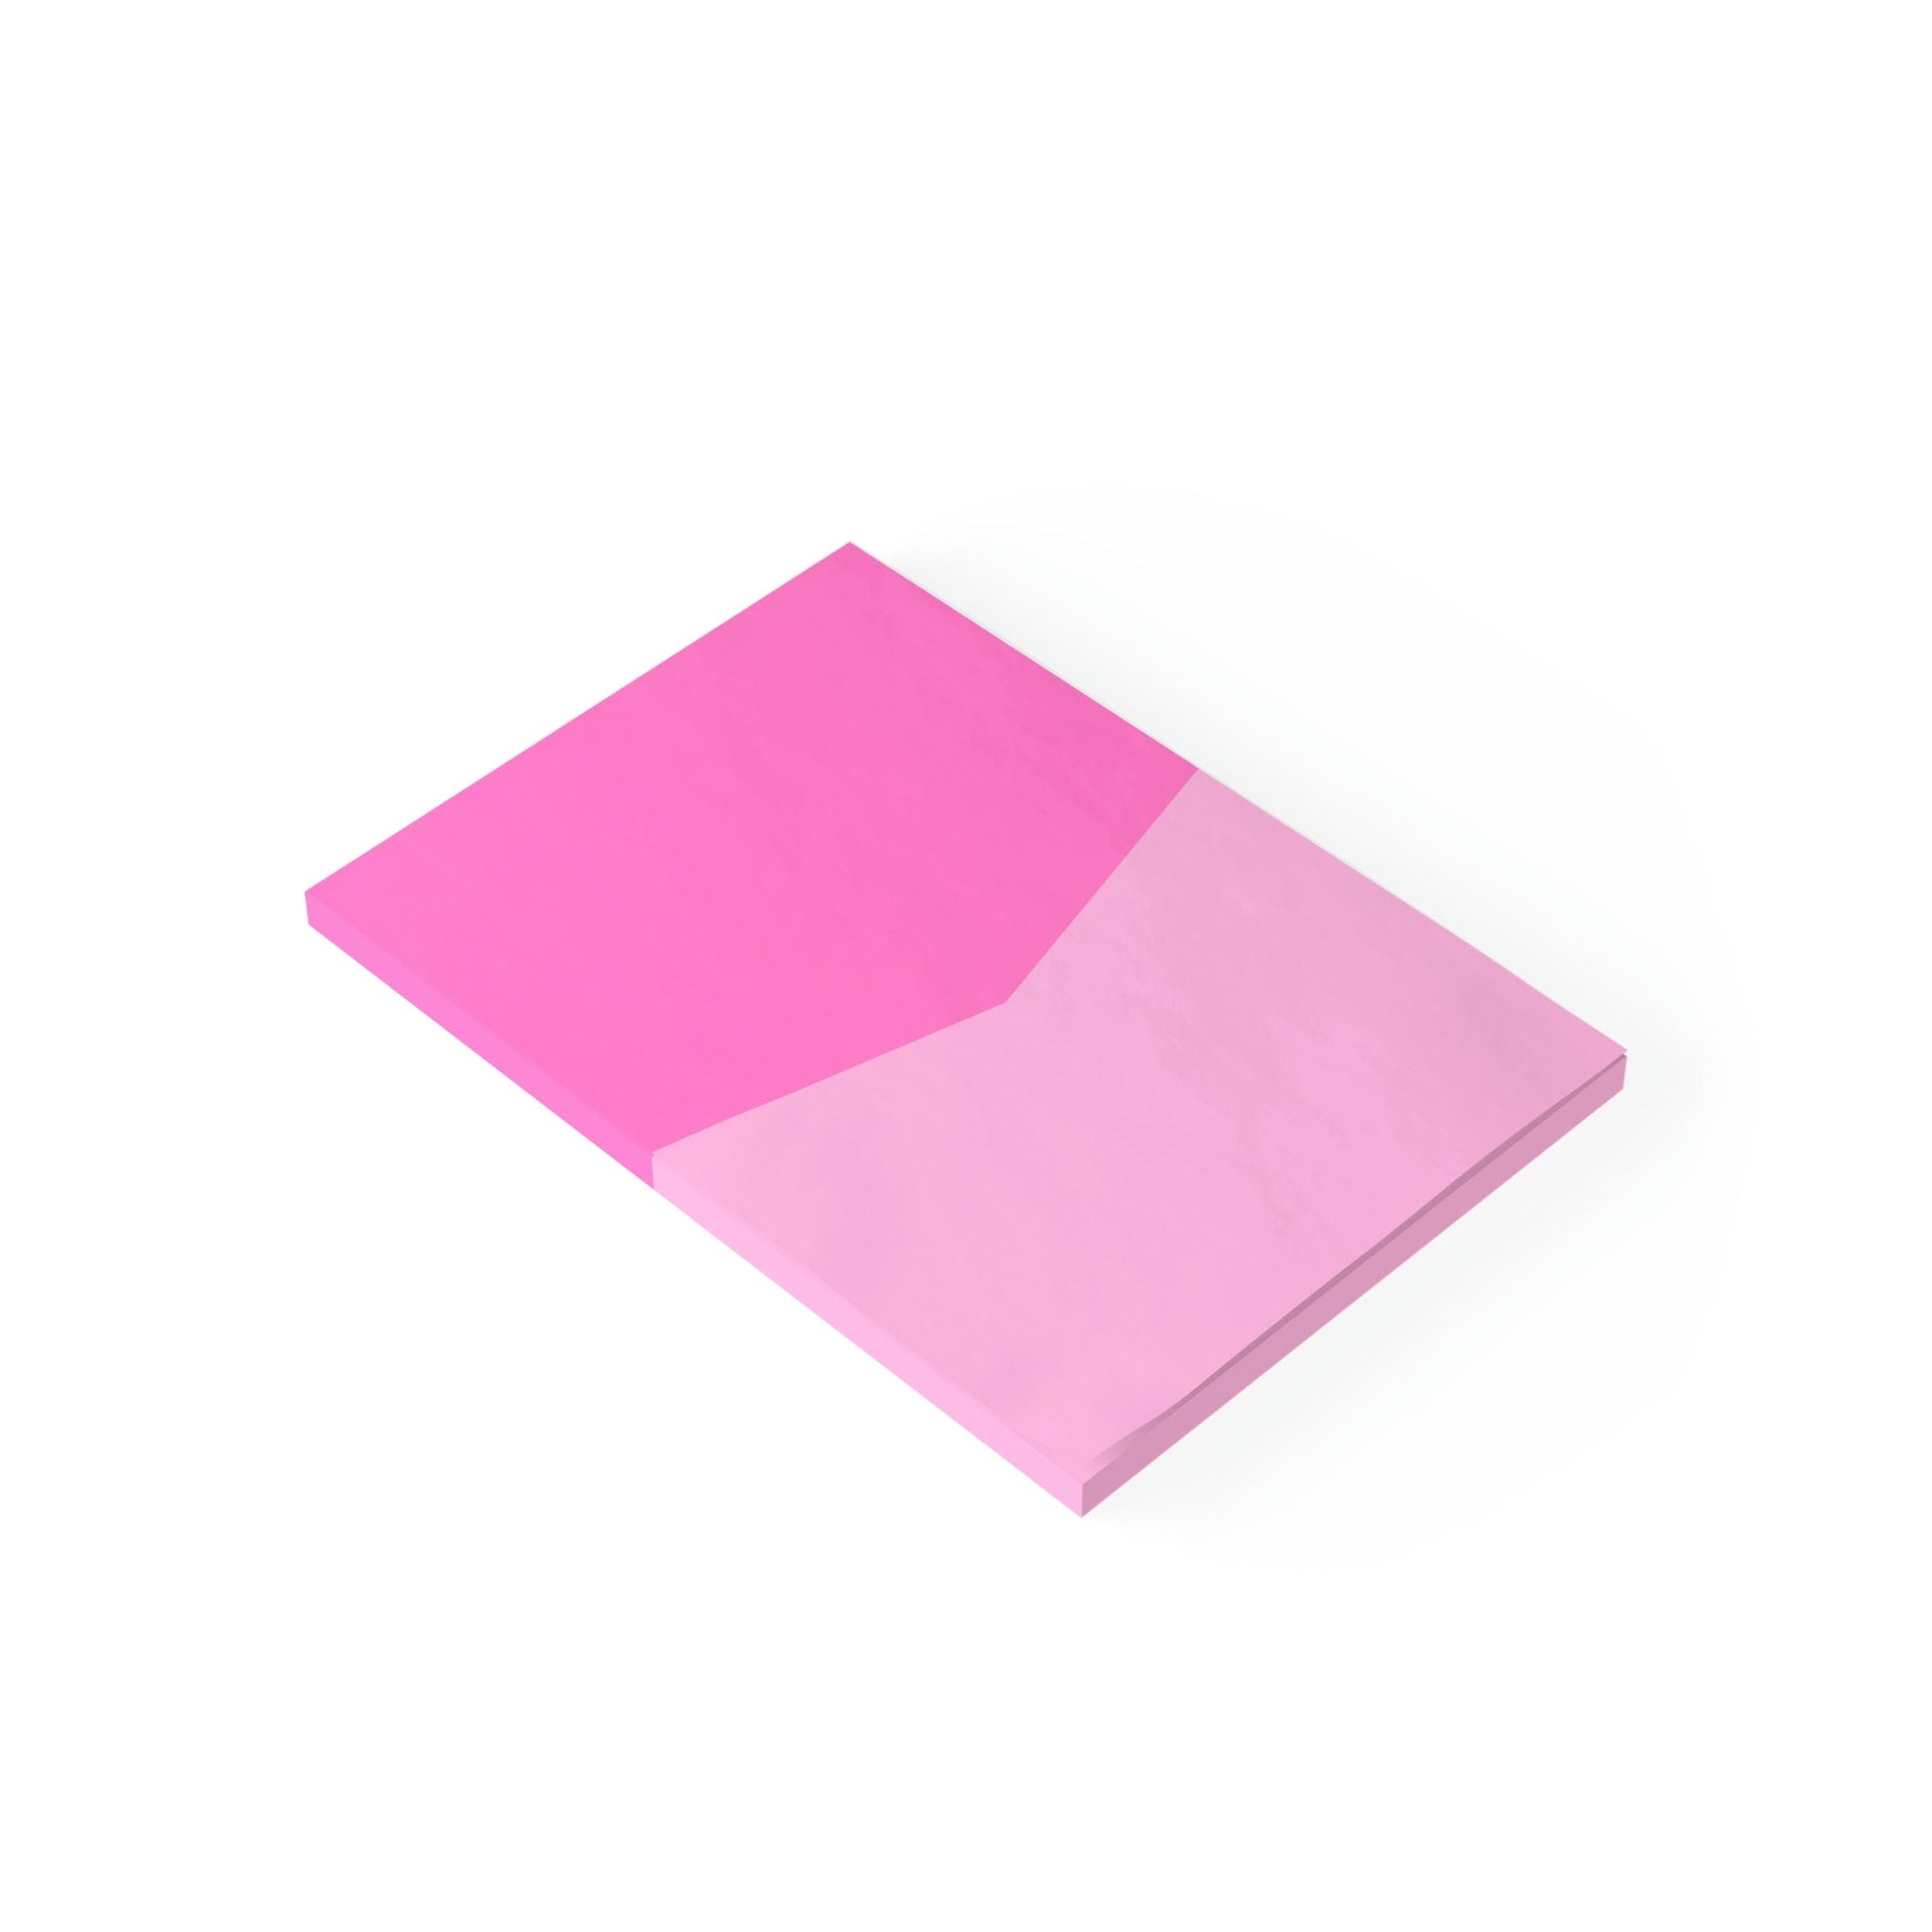 Rosette Duo Post-it® Note Pad Paper products Pink Sweetheart